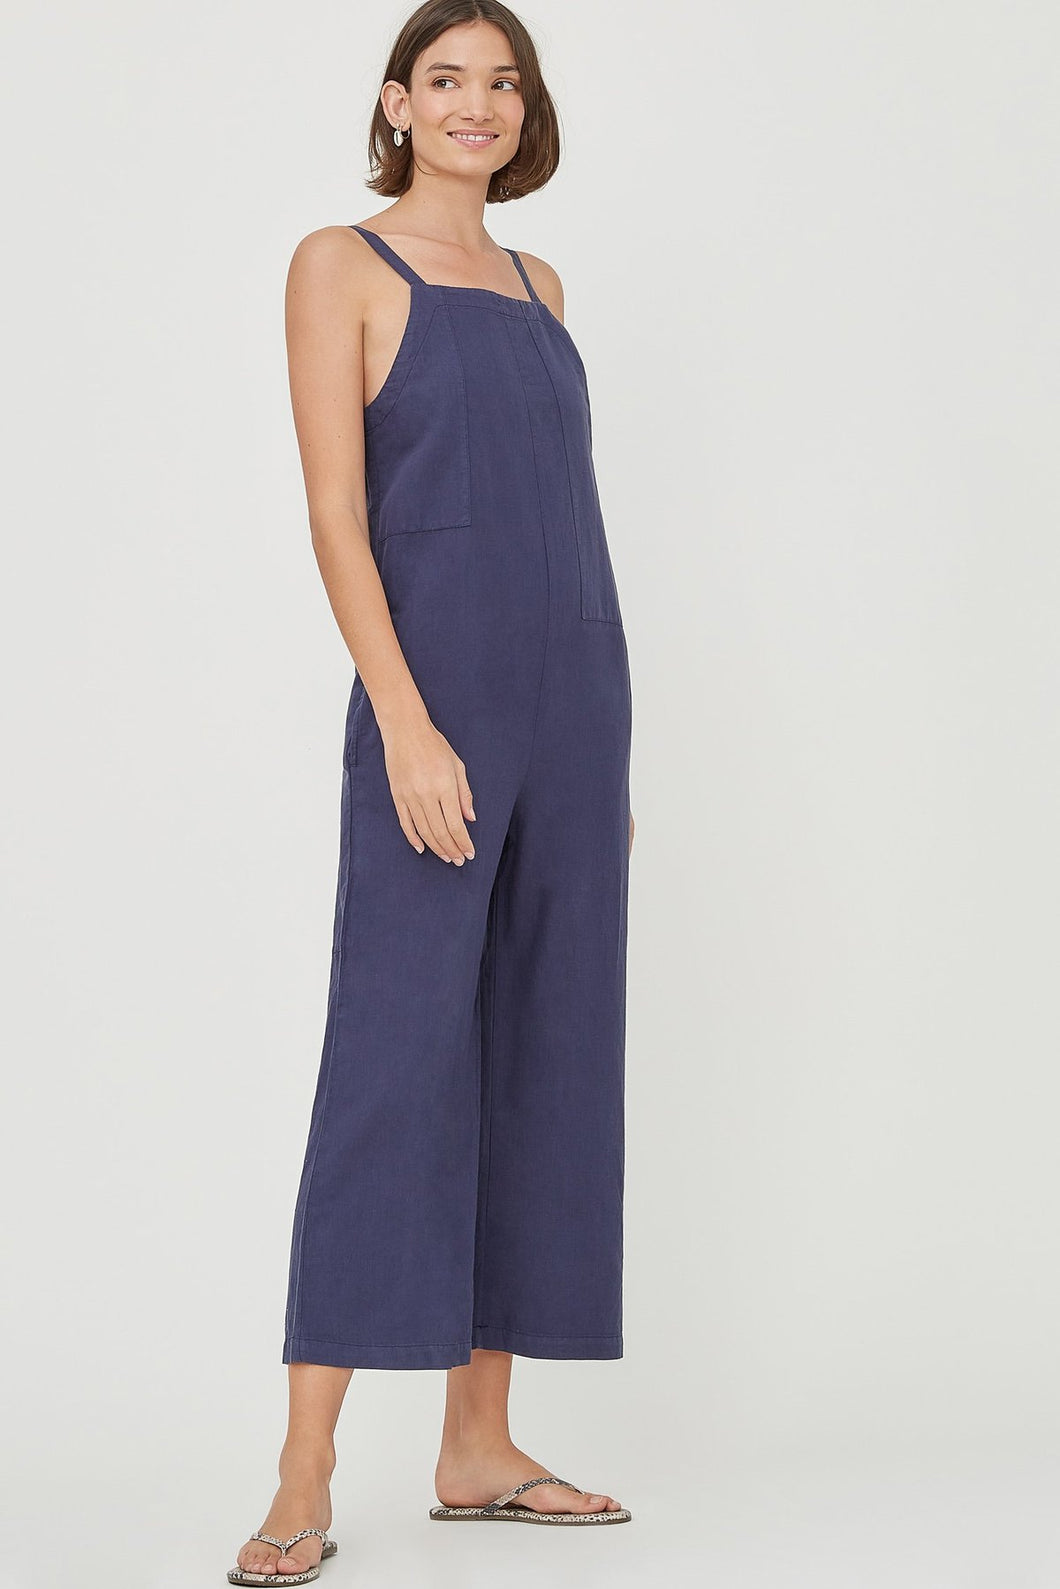 The Go-To Jumpsuit